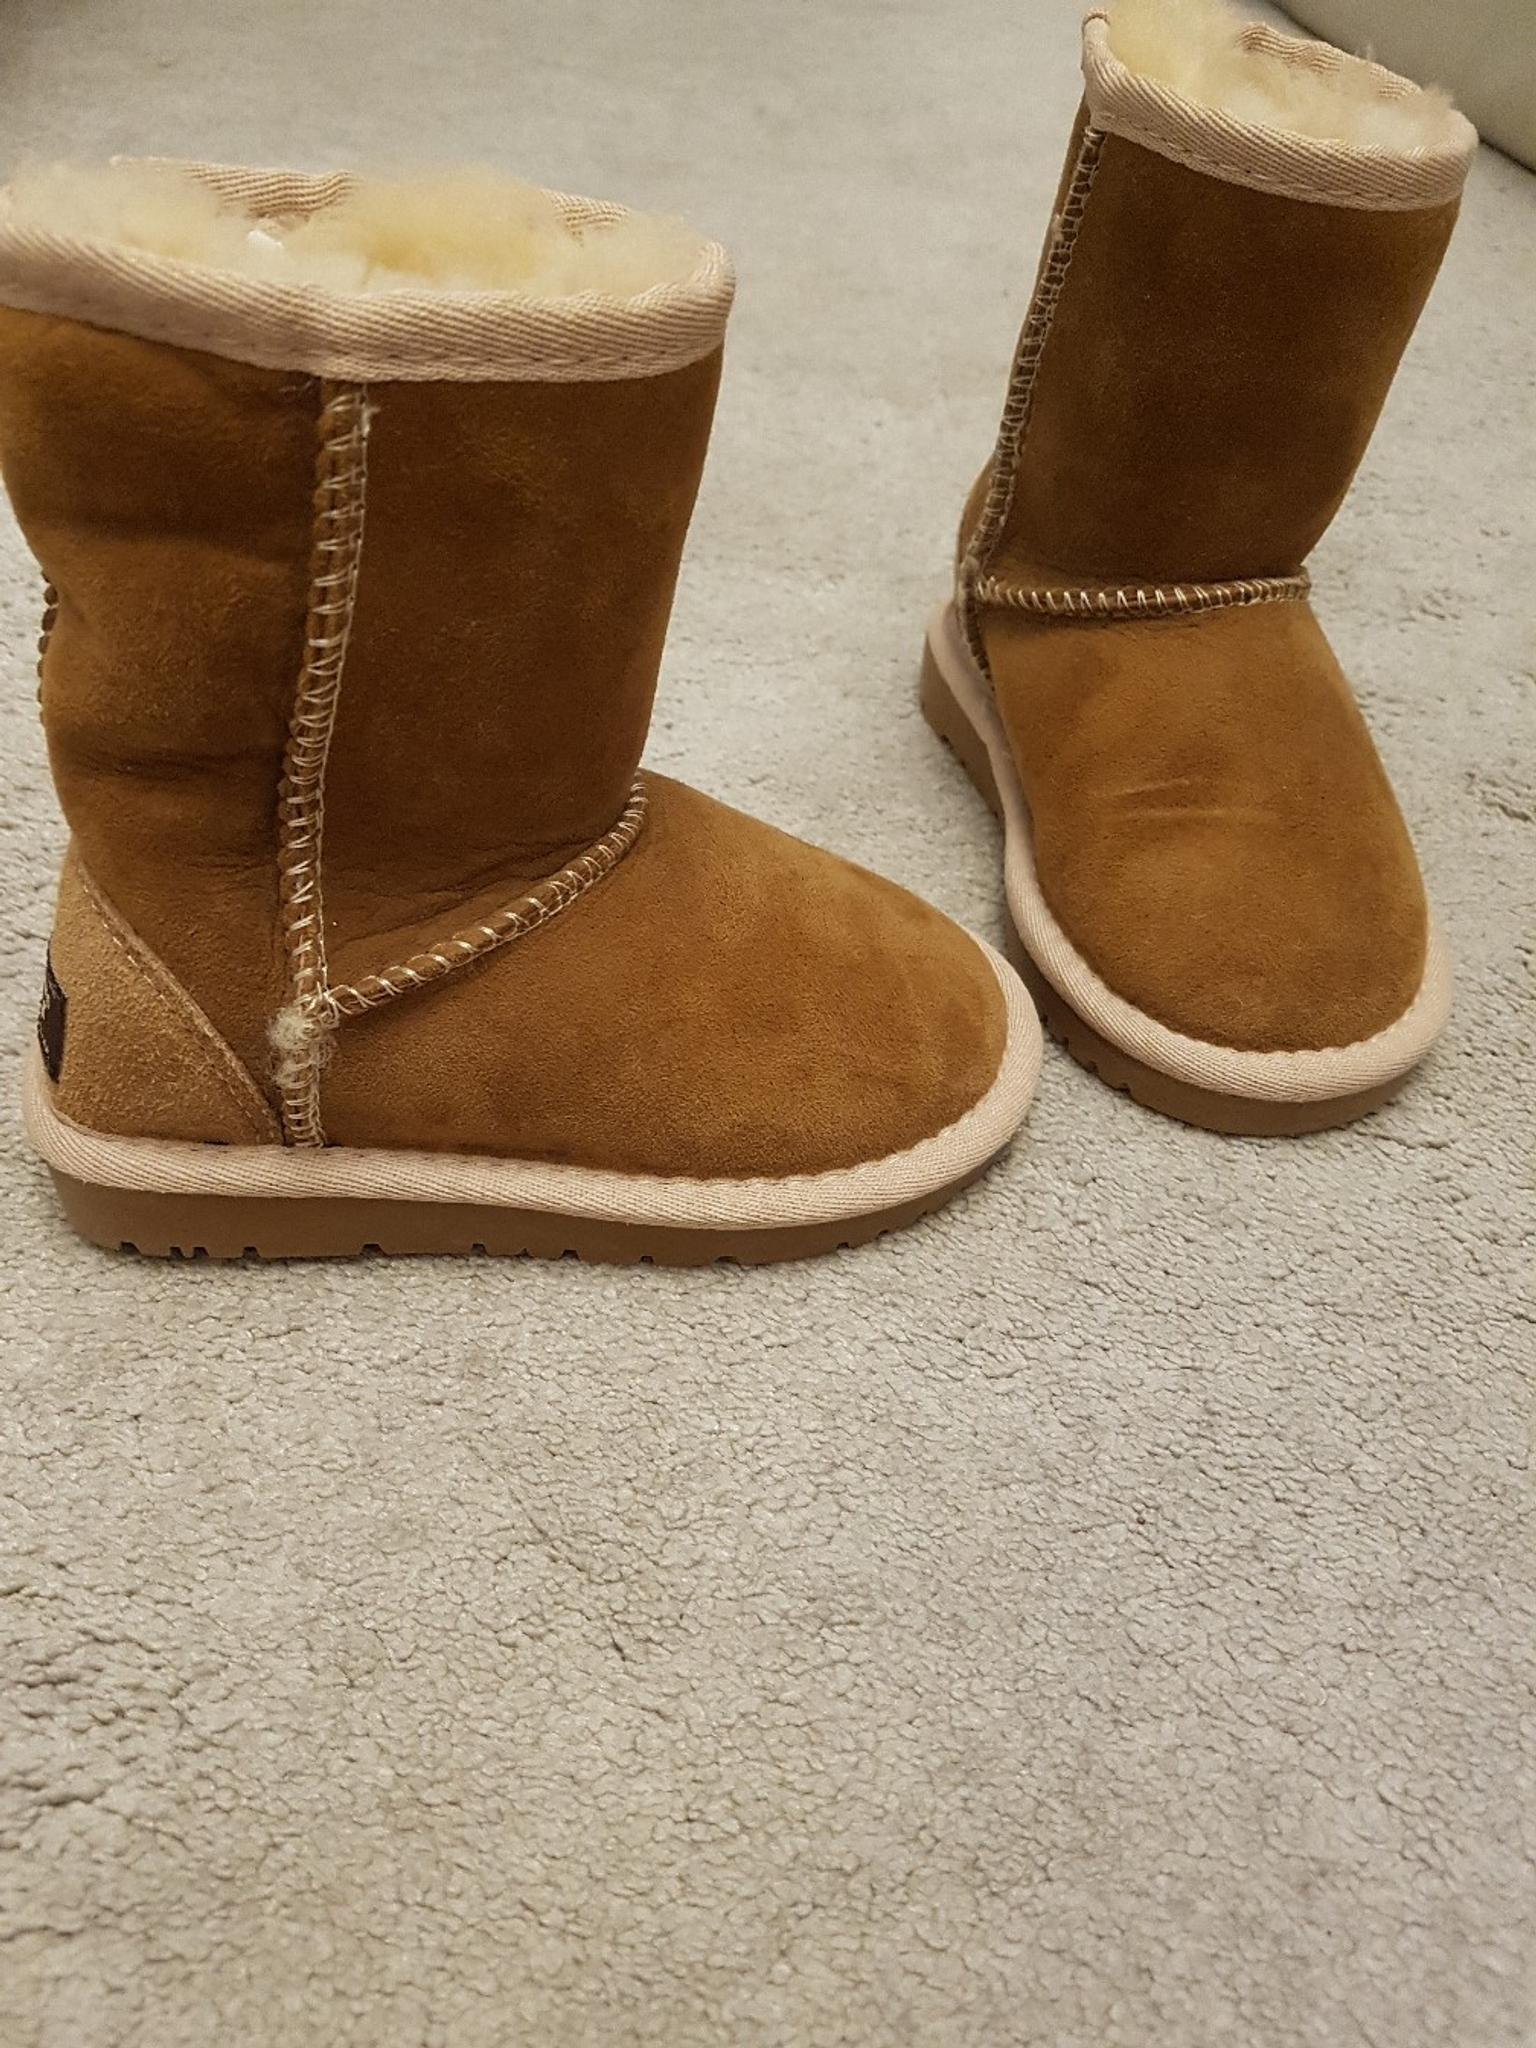 cheap uggs size 7